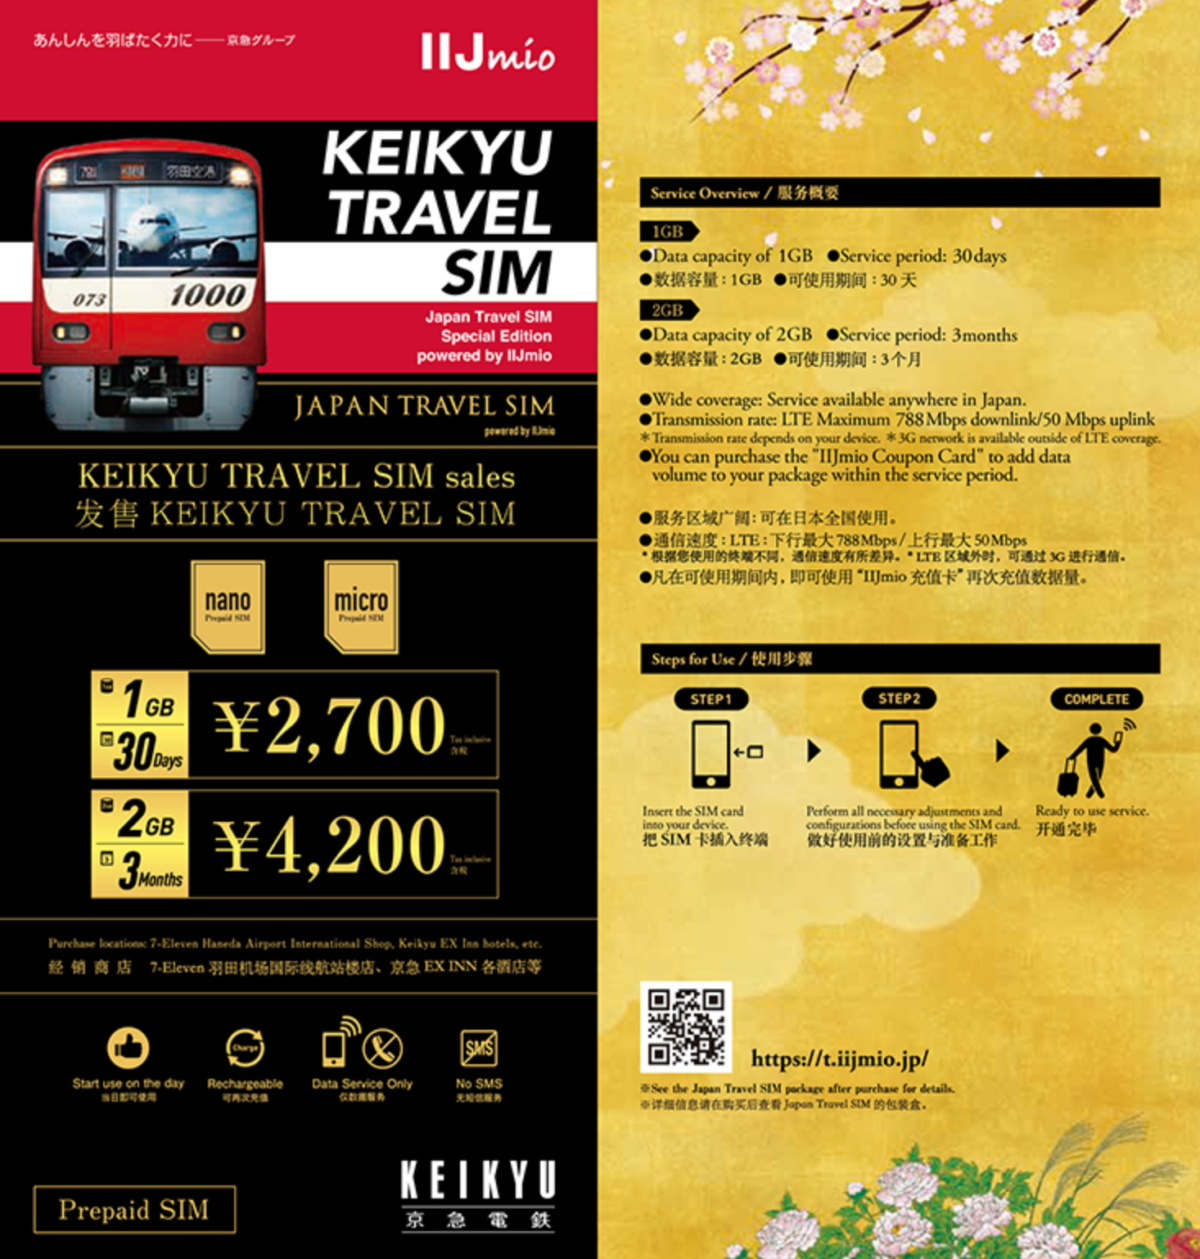 The KEIKYU TRAVEL SIM will be available for purchase beginning February 7, 2018. At Haneda Airport(Tokyo)